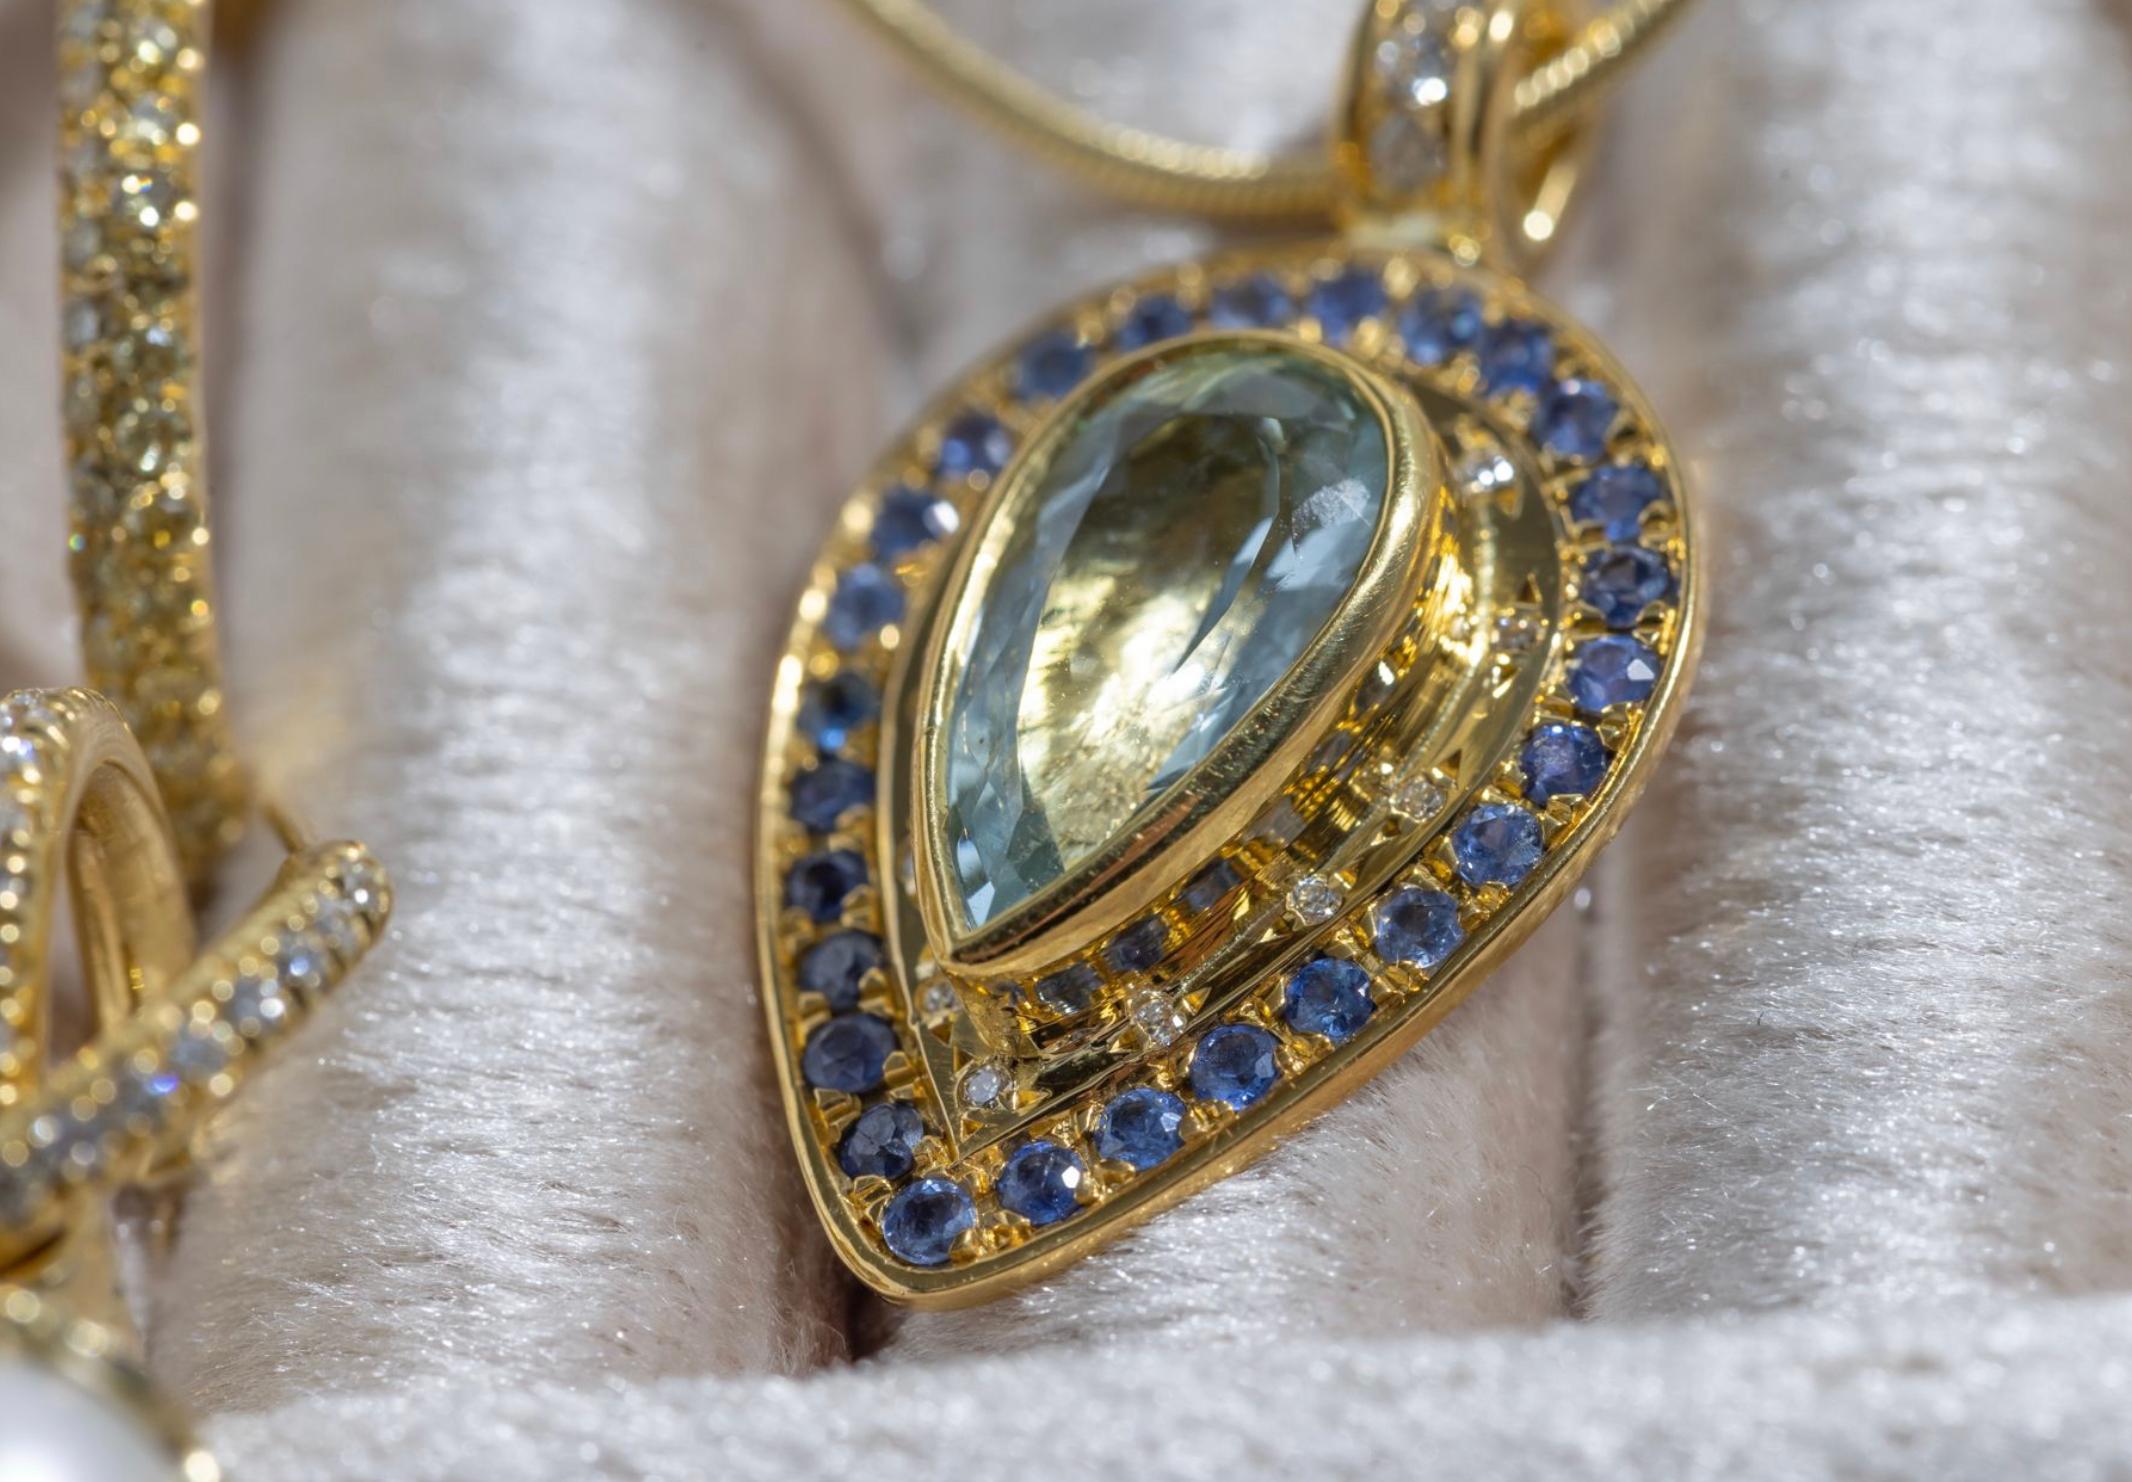 Paris & Lily one-of-a-kind, handmade, 22K gold, aquamarine, sapphire and diamond pendant. The pendant is approximately 24mm in length from the bail to the tip.  The pendant features a pear shaped aquamarine surrounded by diamonds and a border of